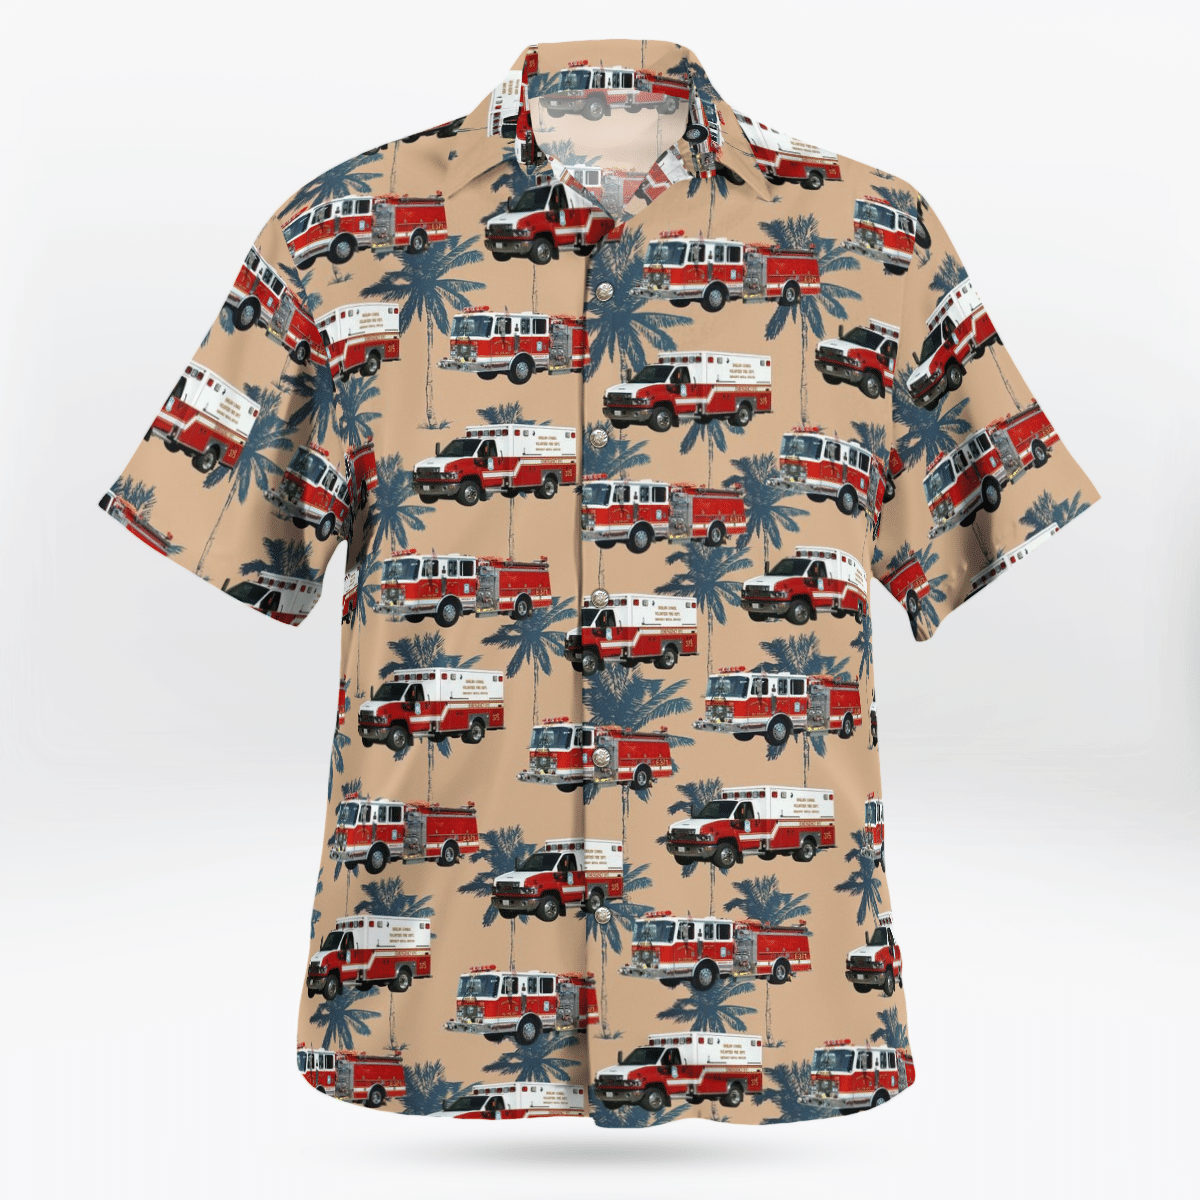 Hawaiian shirts never go out of style 82